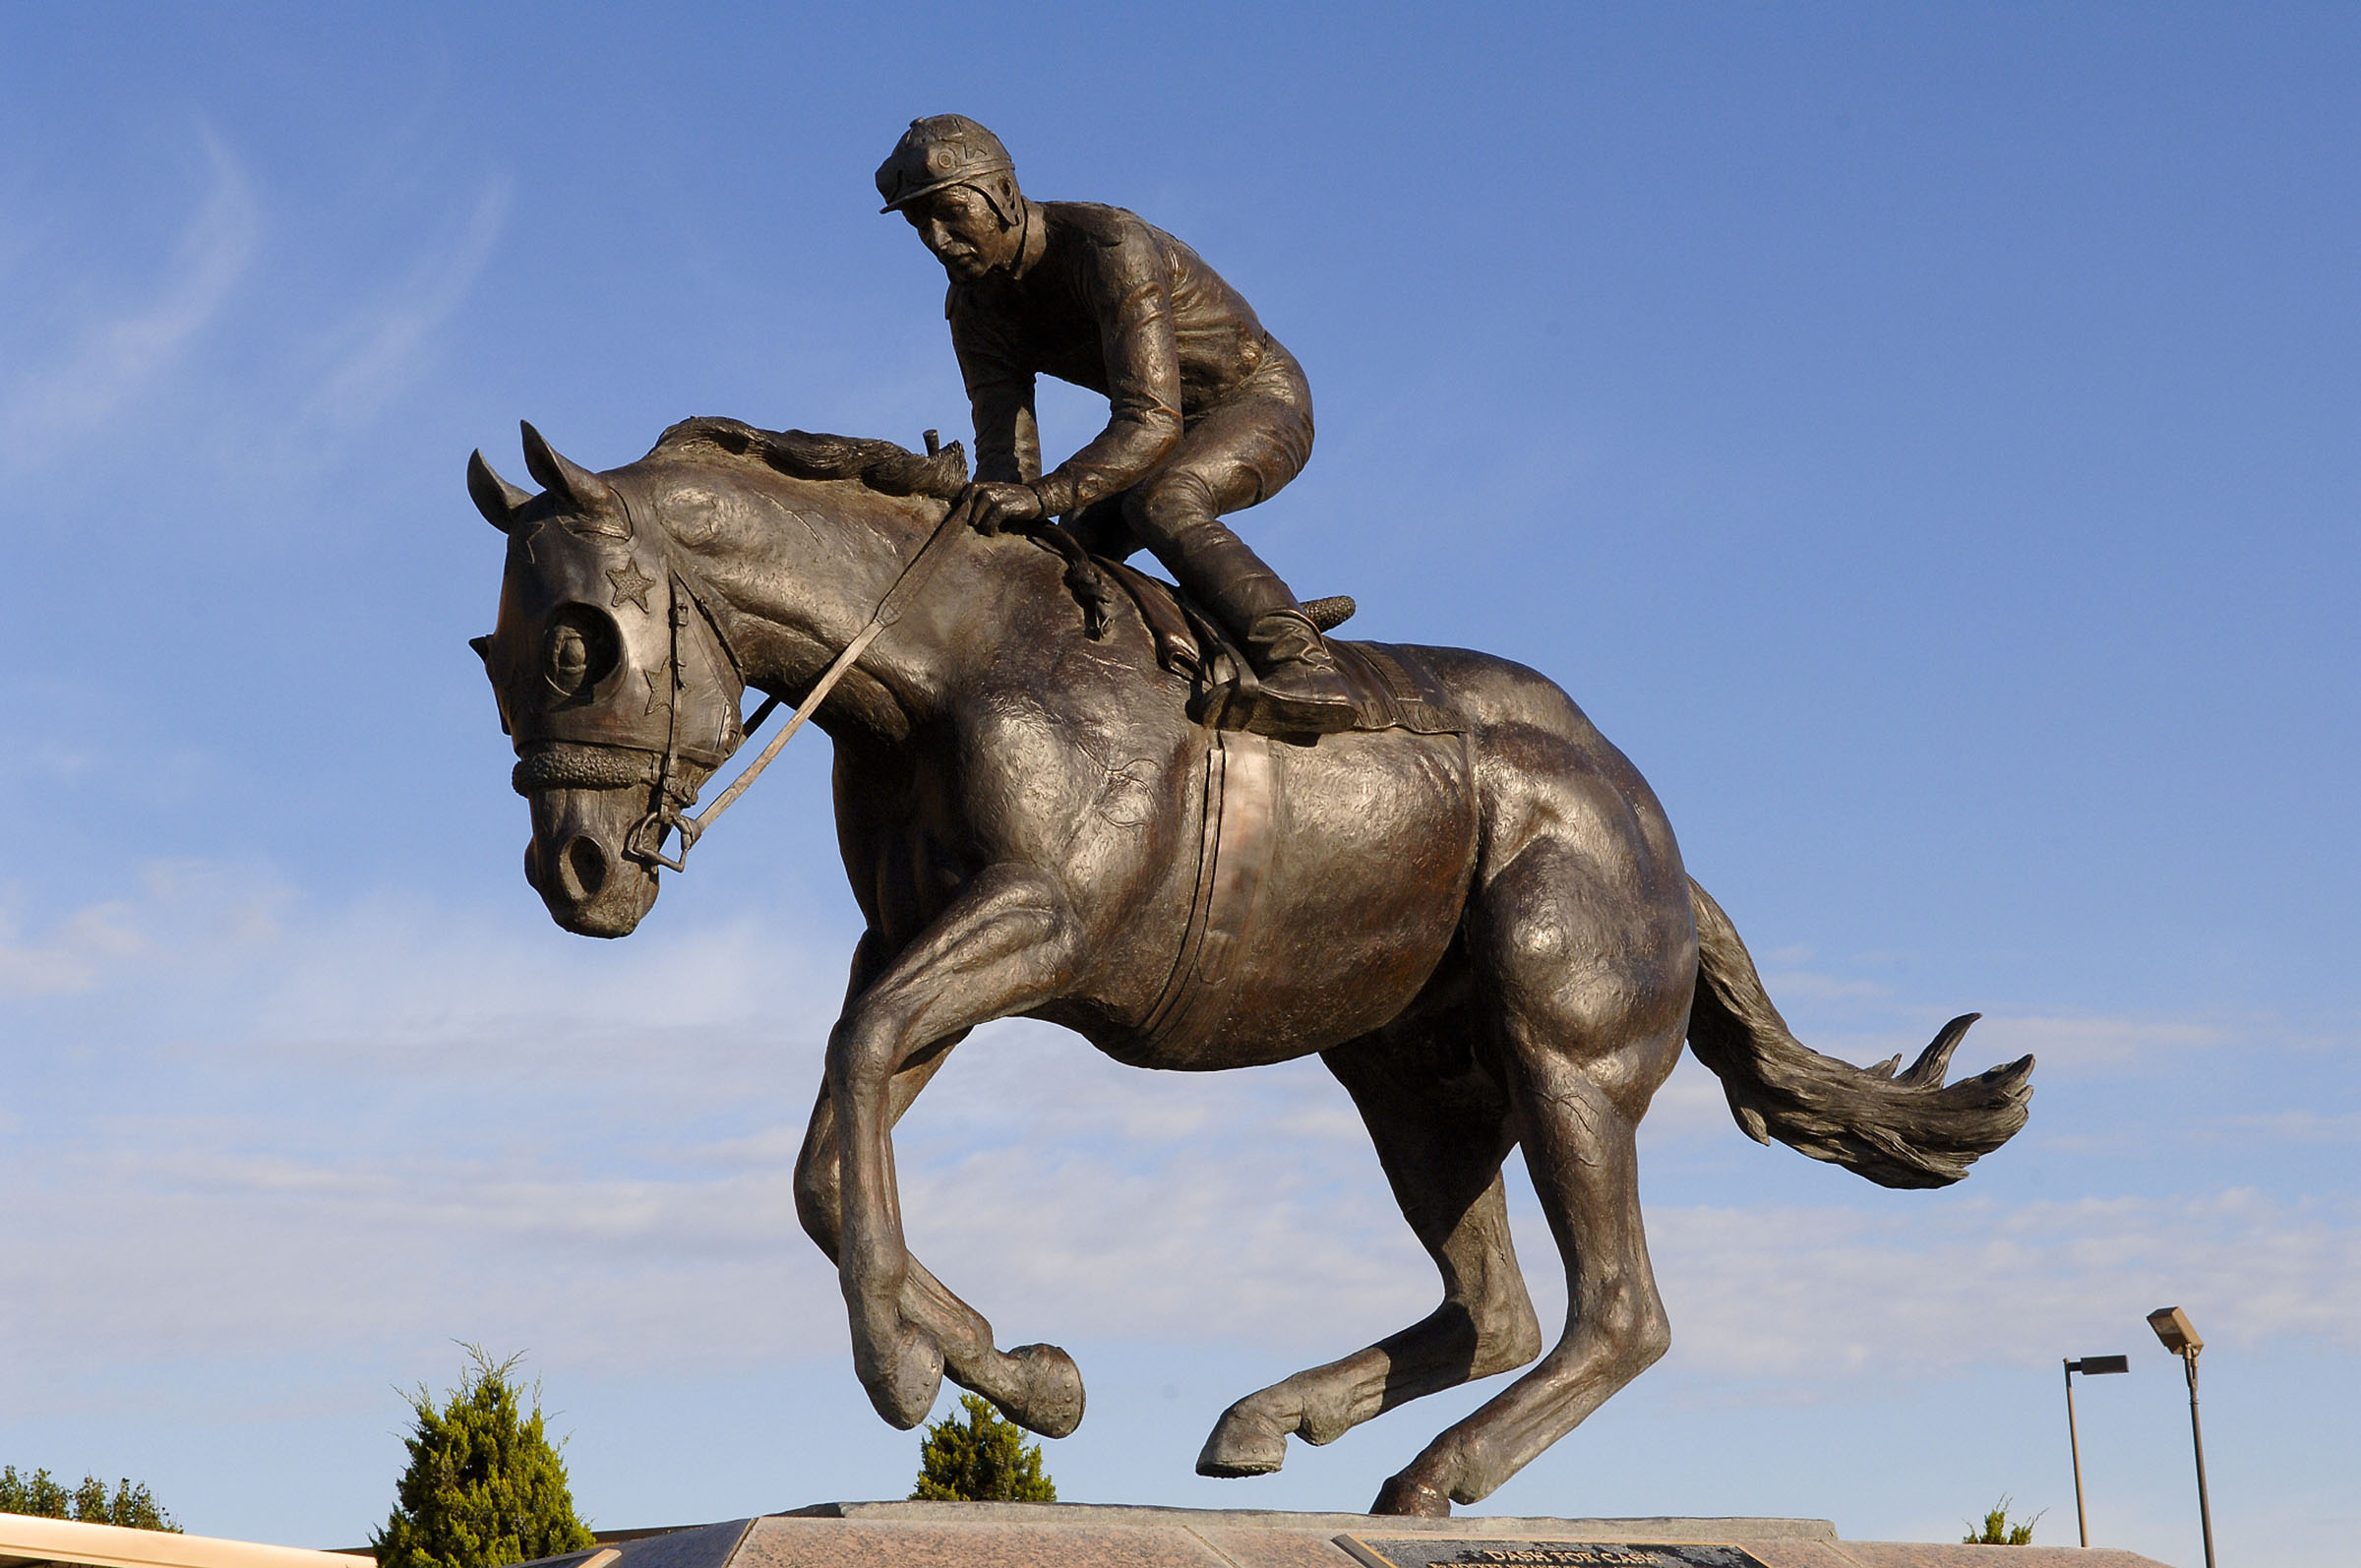 A bronze statue of a person riding a horse in front of blue sky